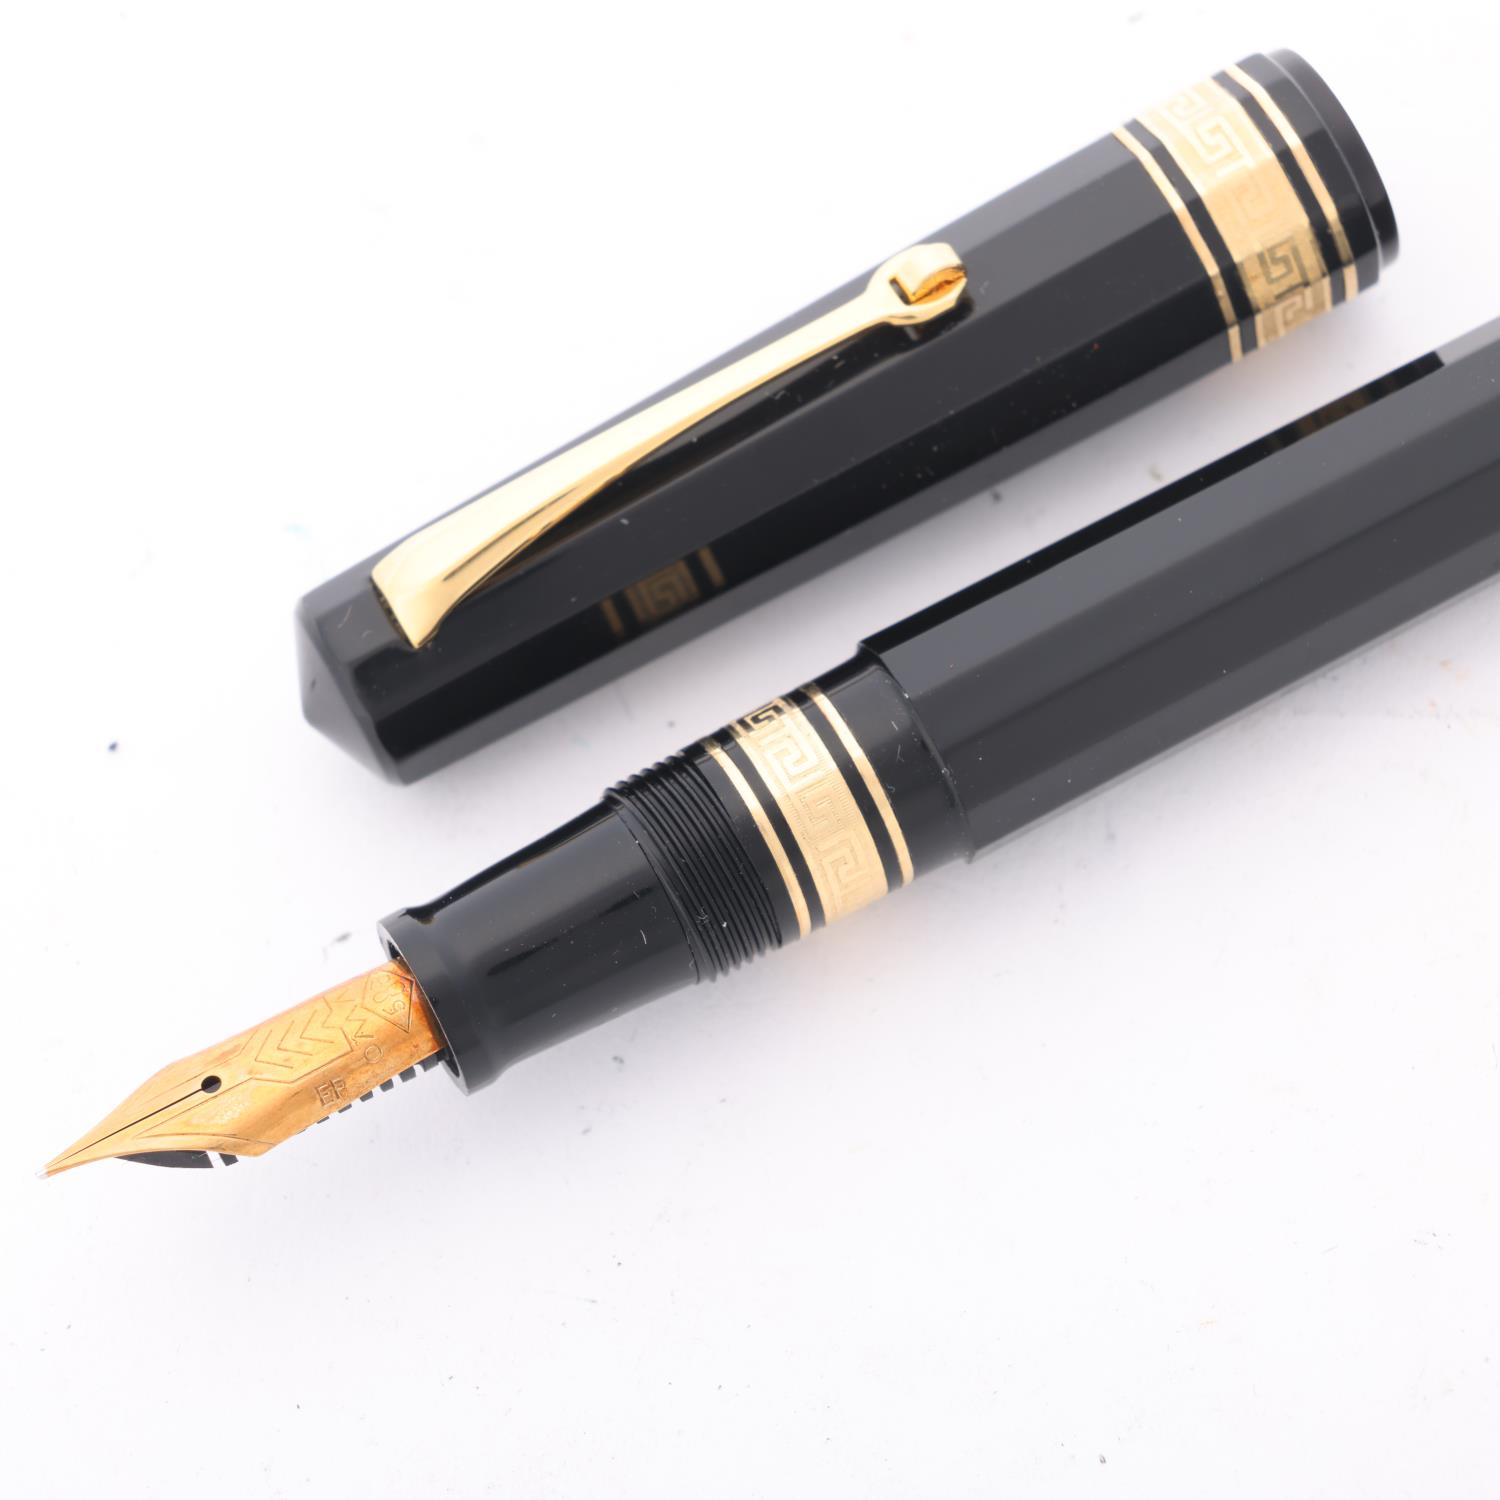 An Omas Dama fountain pen, with 14ct EF nib and black resin piston fill body, boxed with papers Very - Image 2 of 4